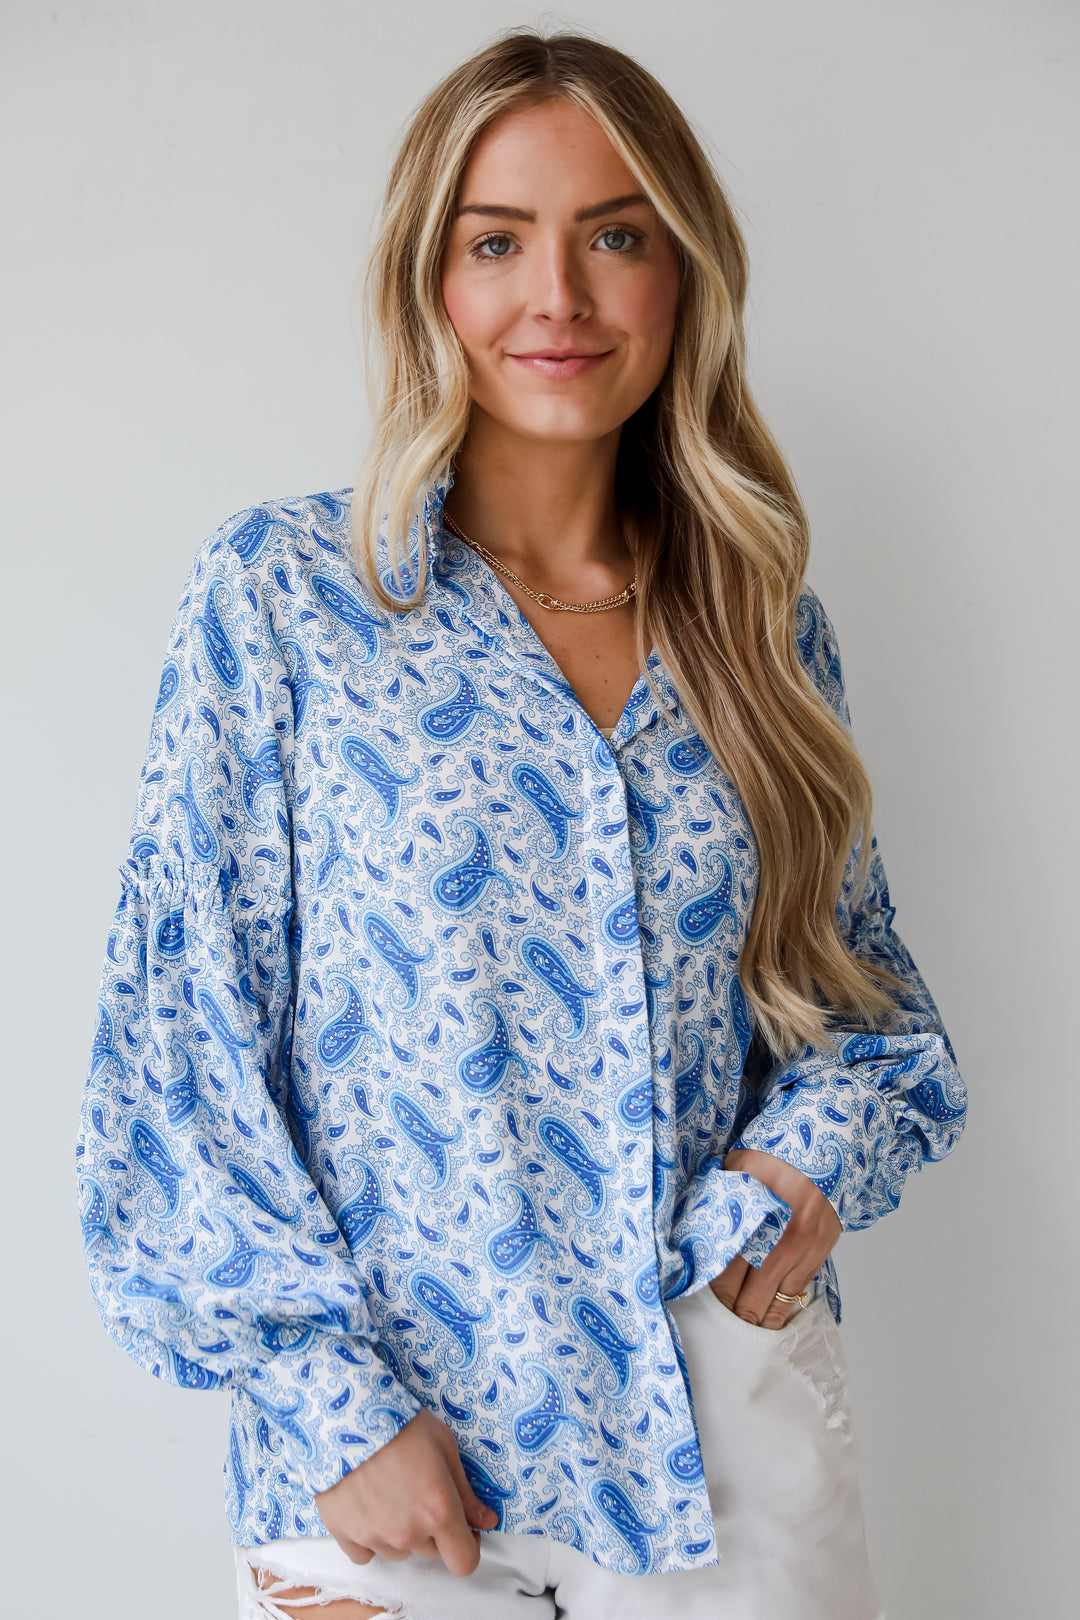 Blue Paisley Blouse, Truly Delightful Blue Paisley Blouse, Blue Paisley Top, Women's Top, Tops For Work